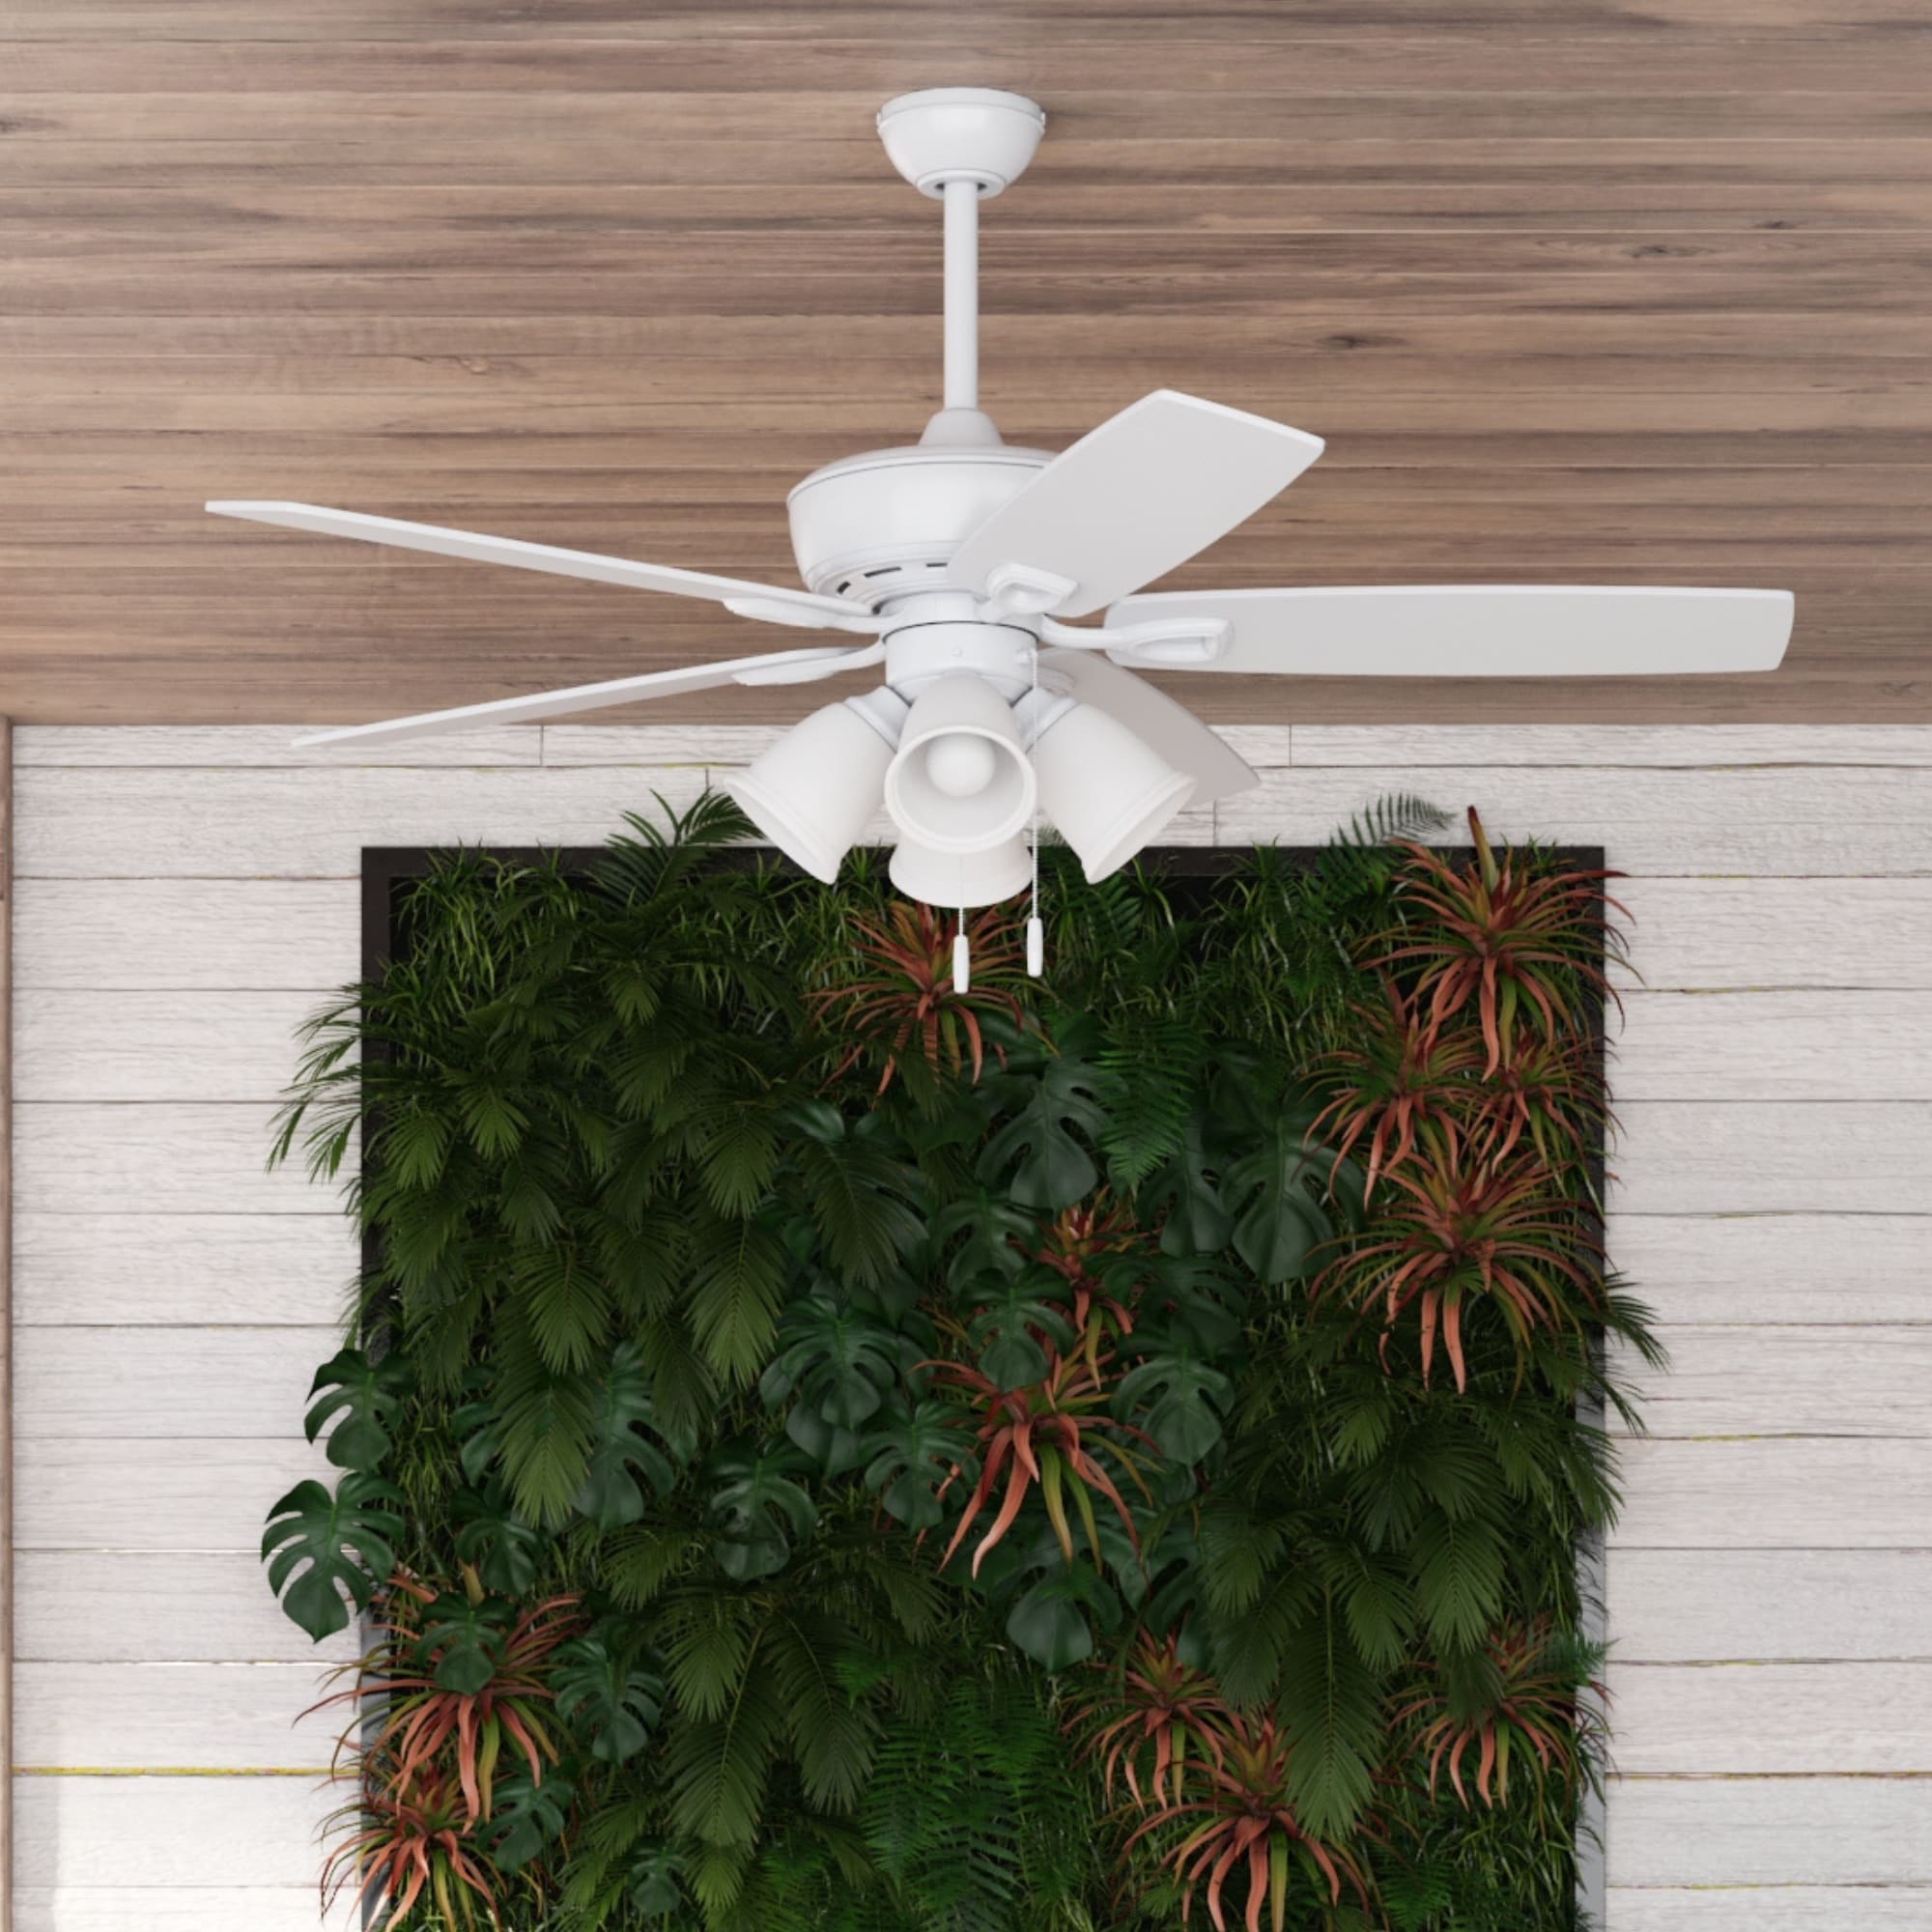 Harbor Breeze Notus 52 In White Indoor Downrod Or Flush Mount Ceiling Fan With Light 5 Blade The Fans Department At Lowes Com